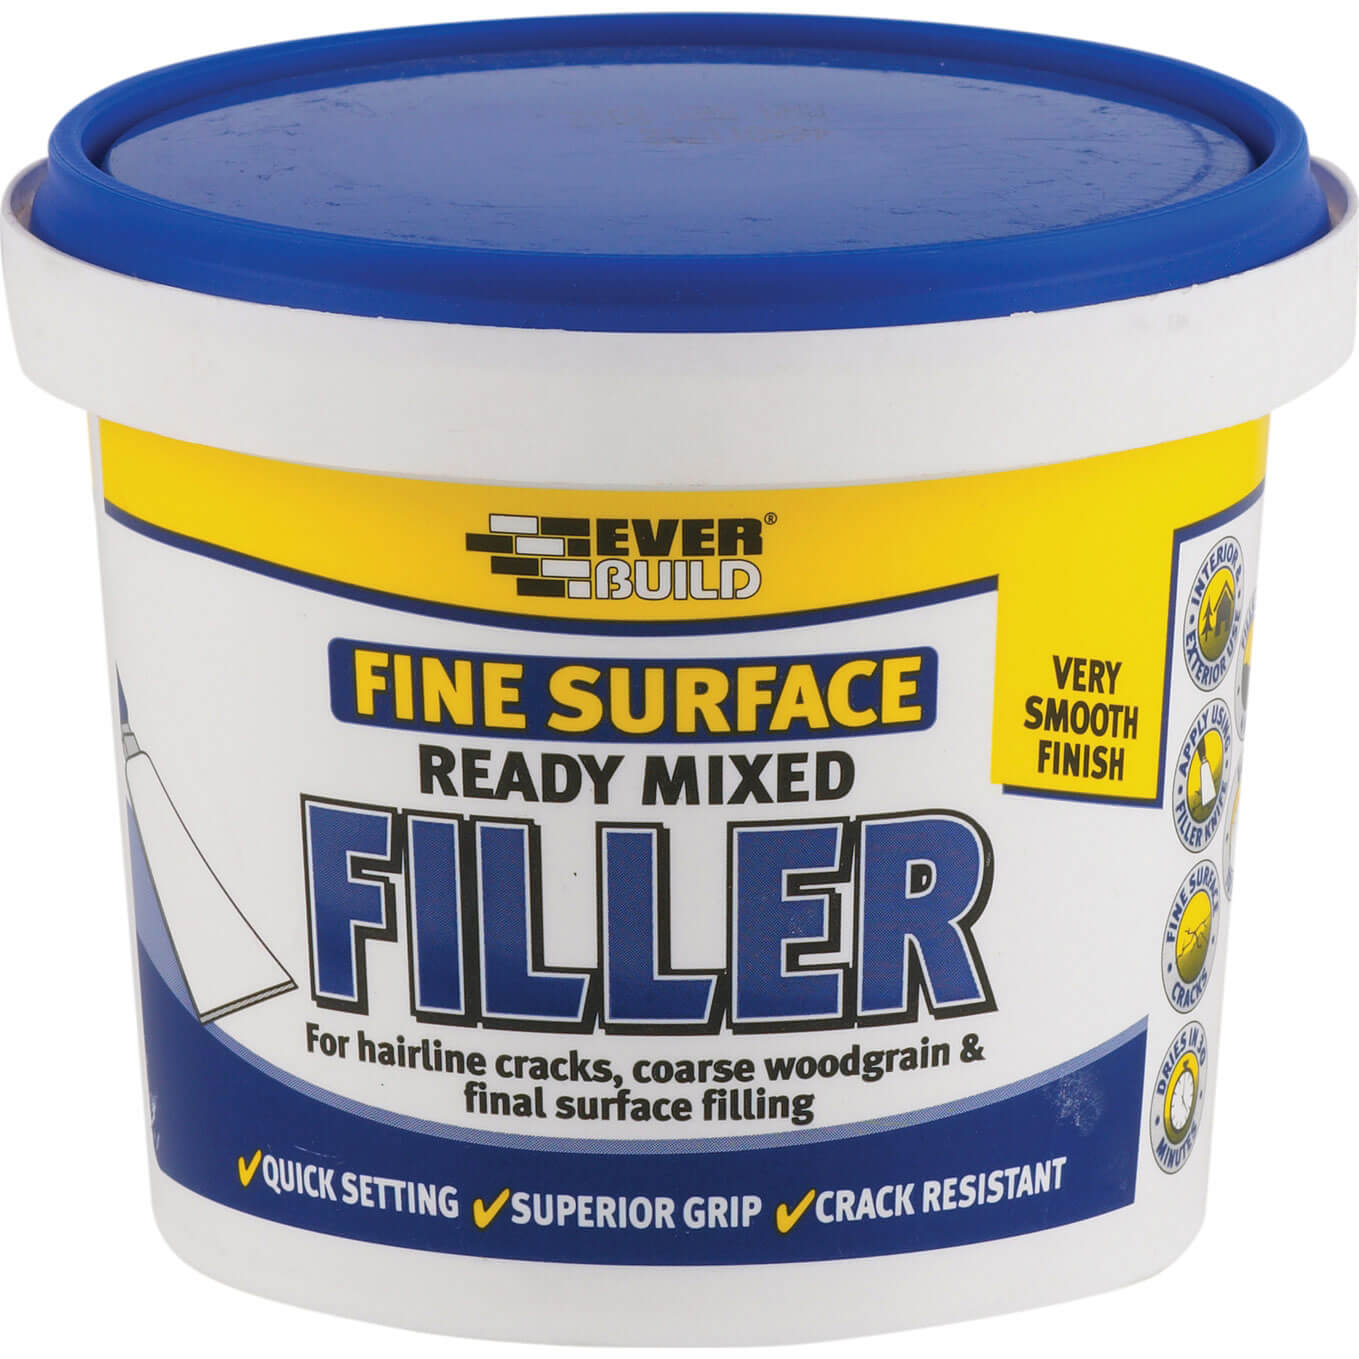 Image of Everbuild Ready Mixed Fine Surface Filler 600g